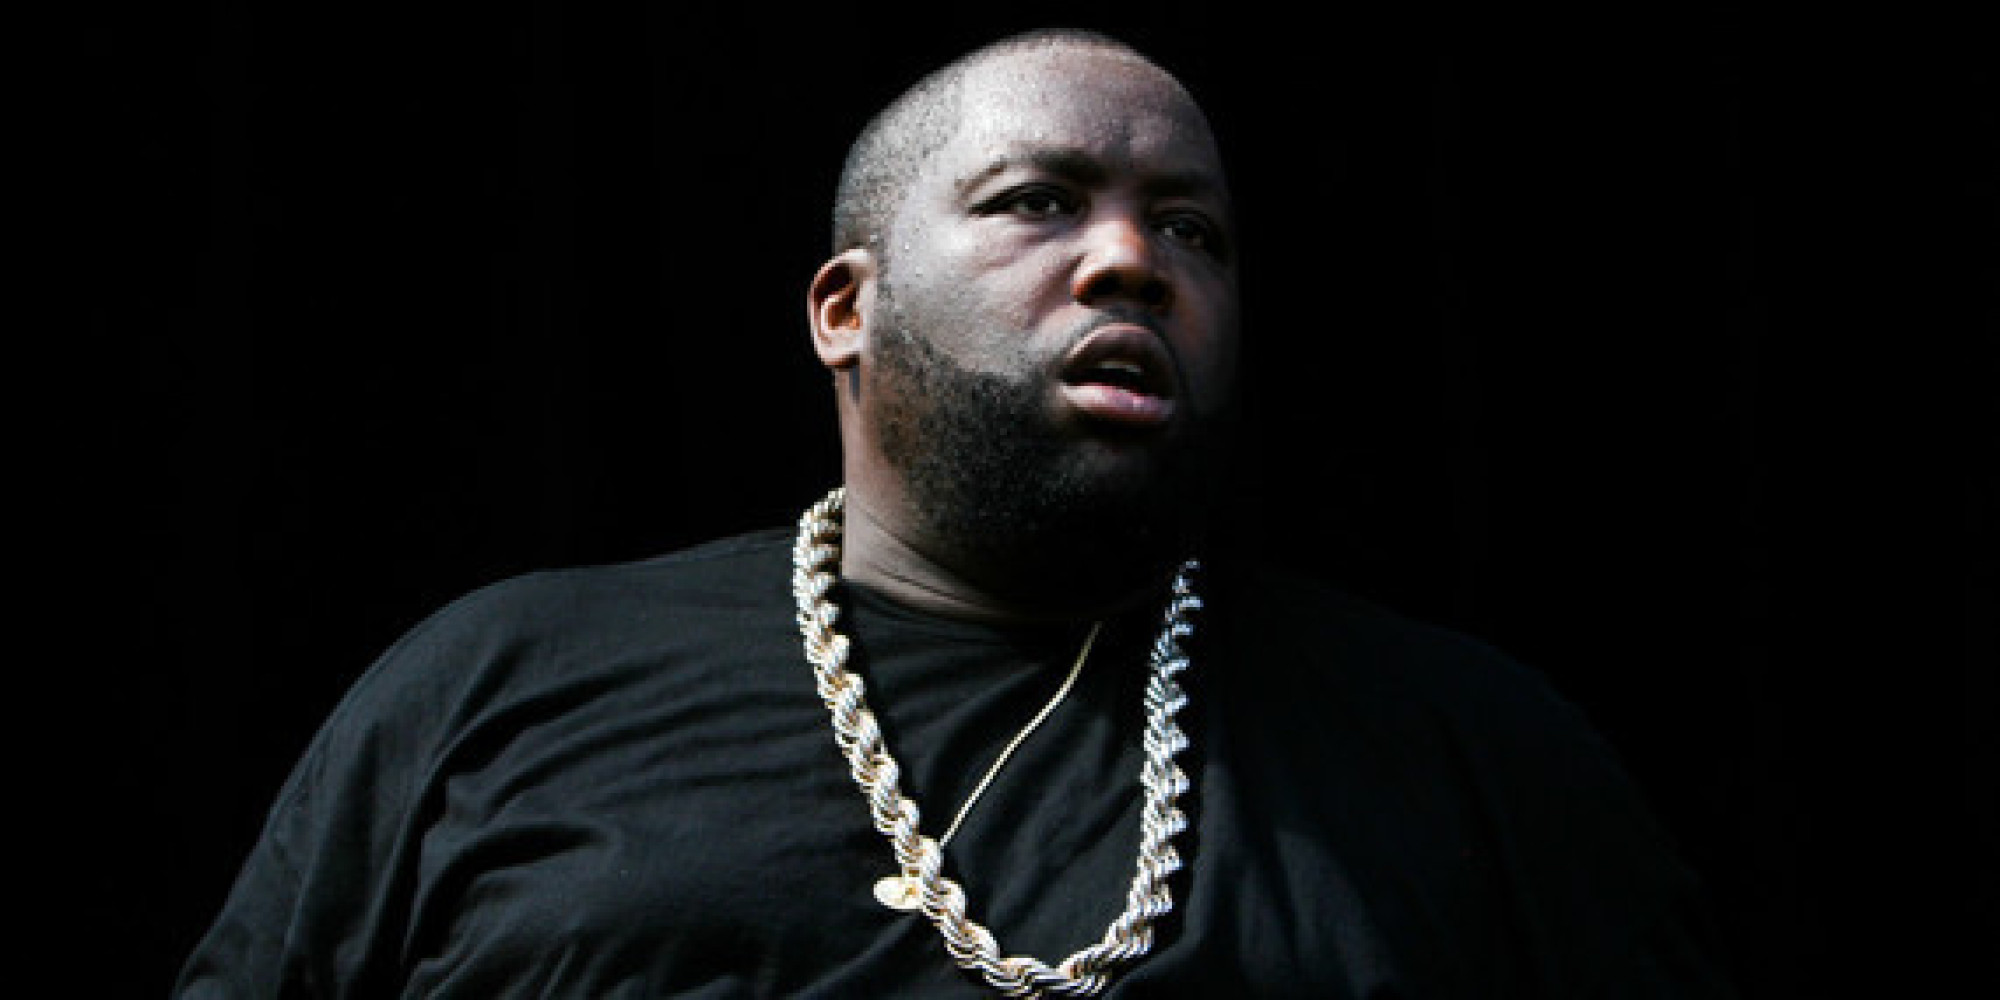 CHICAGO, IL - JULY 21:  Killer Mike performs onstage during the 2013 Pitchfork Music Festival at Union Park on July 21, 2013 in Chicago, Illinois.  (Photo by Roger Kisby/Getty Images)